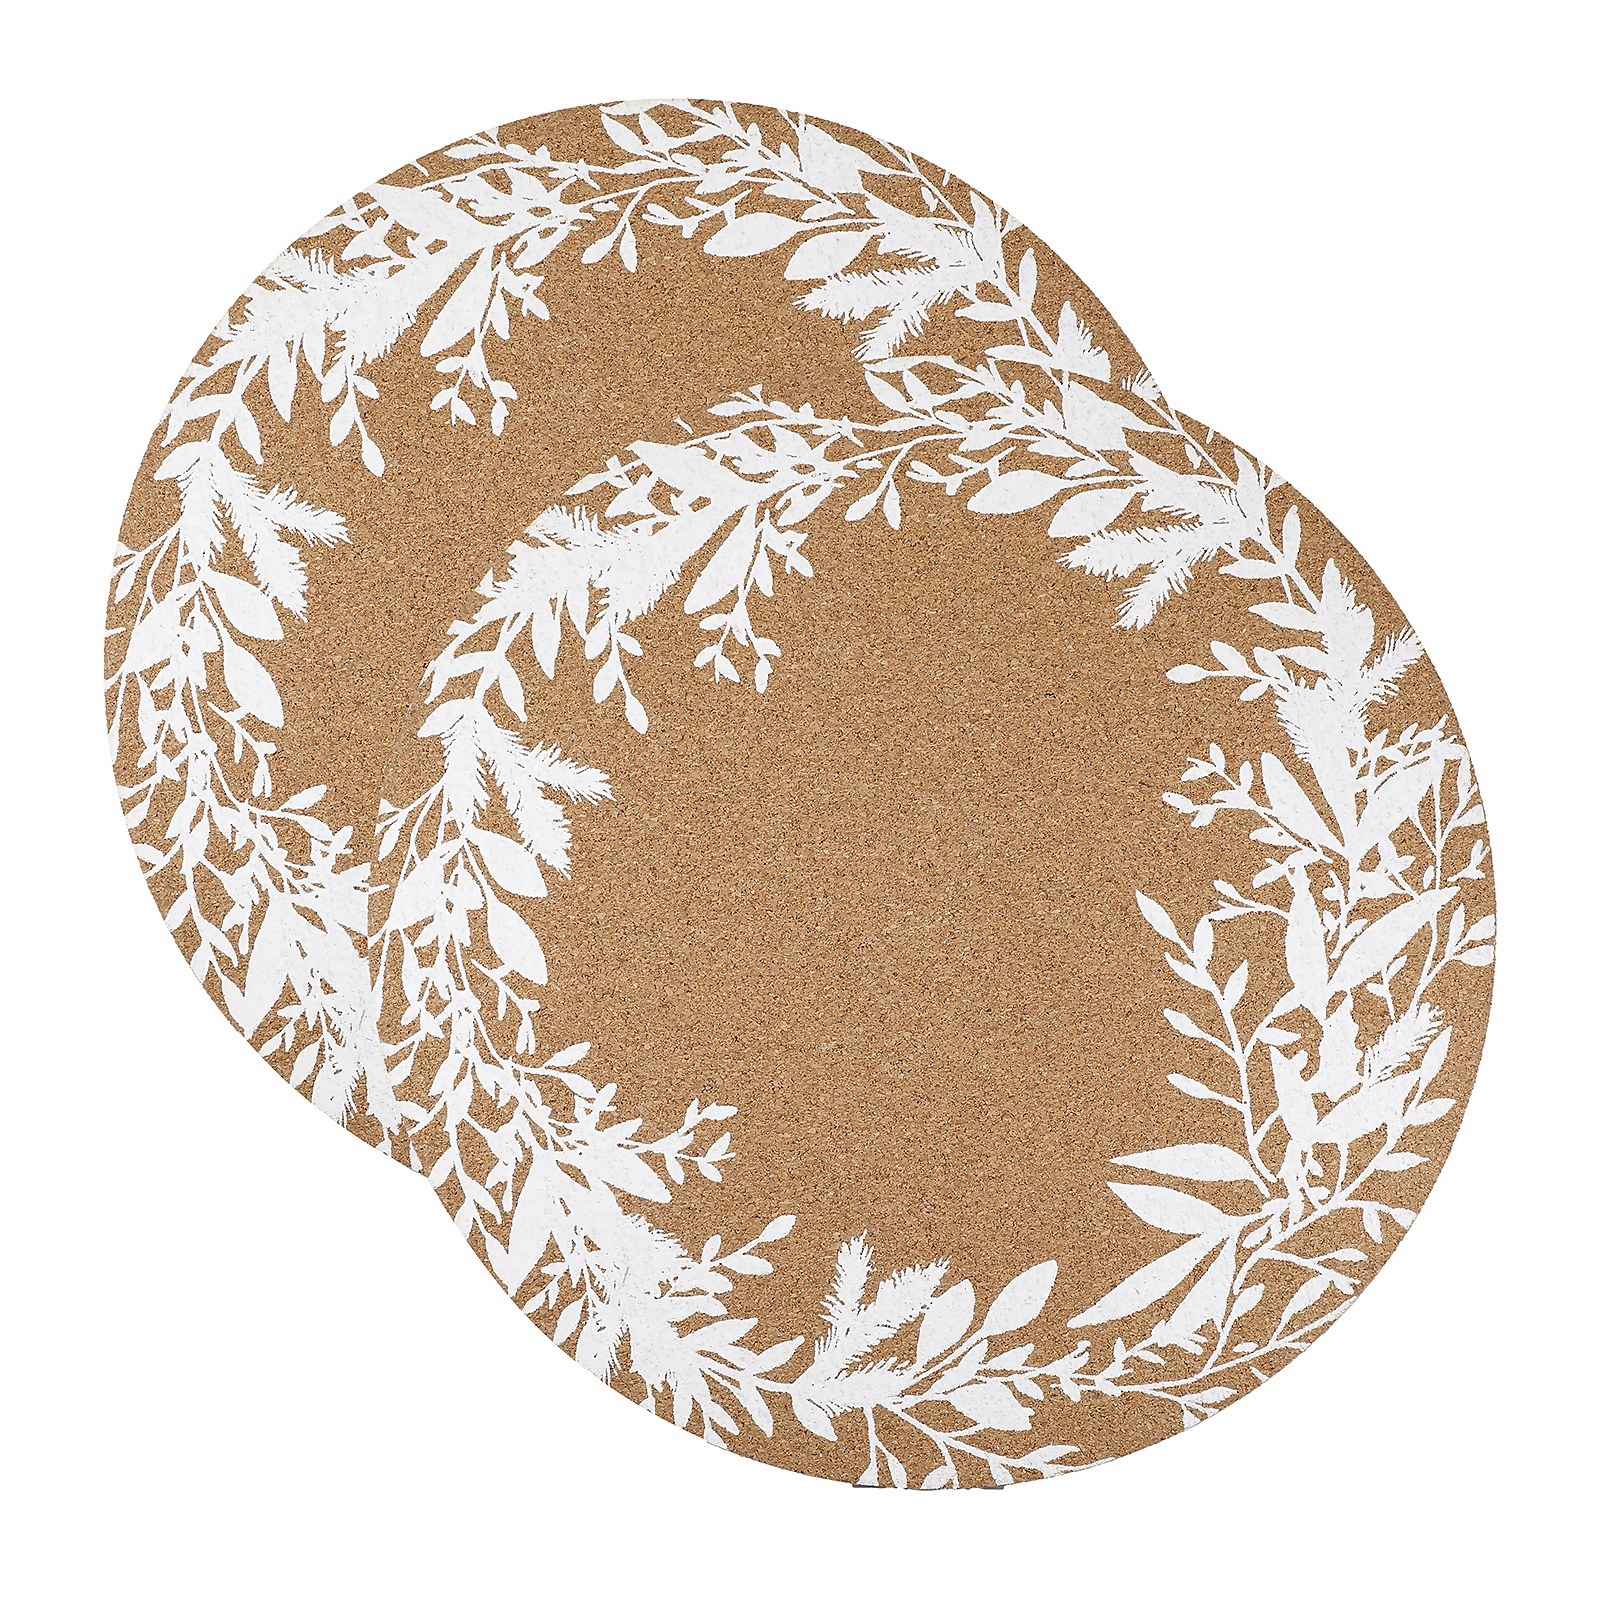 Photo of Country Living Winter Eucalyptus Cork Placemats - 2 Pack